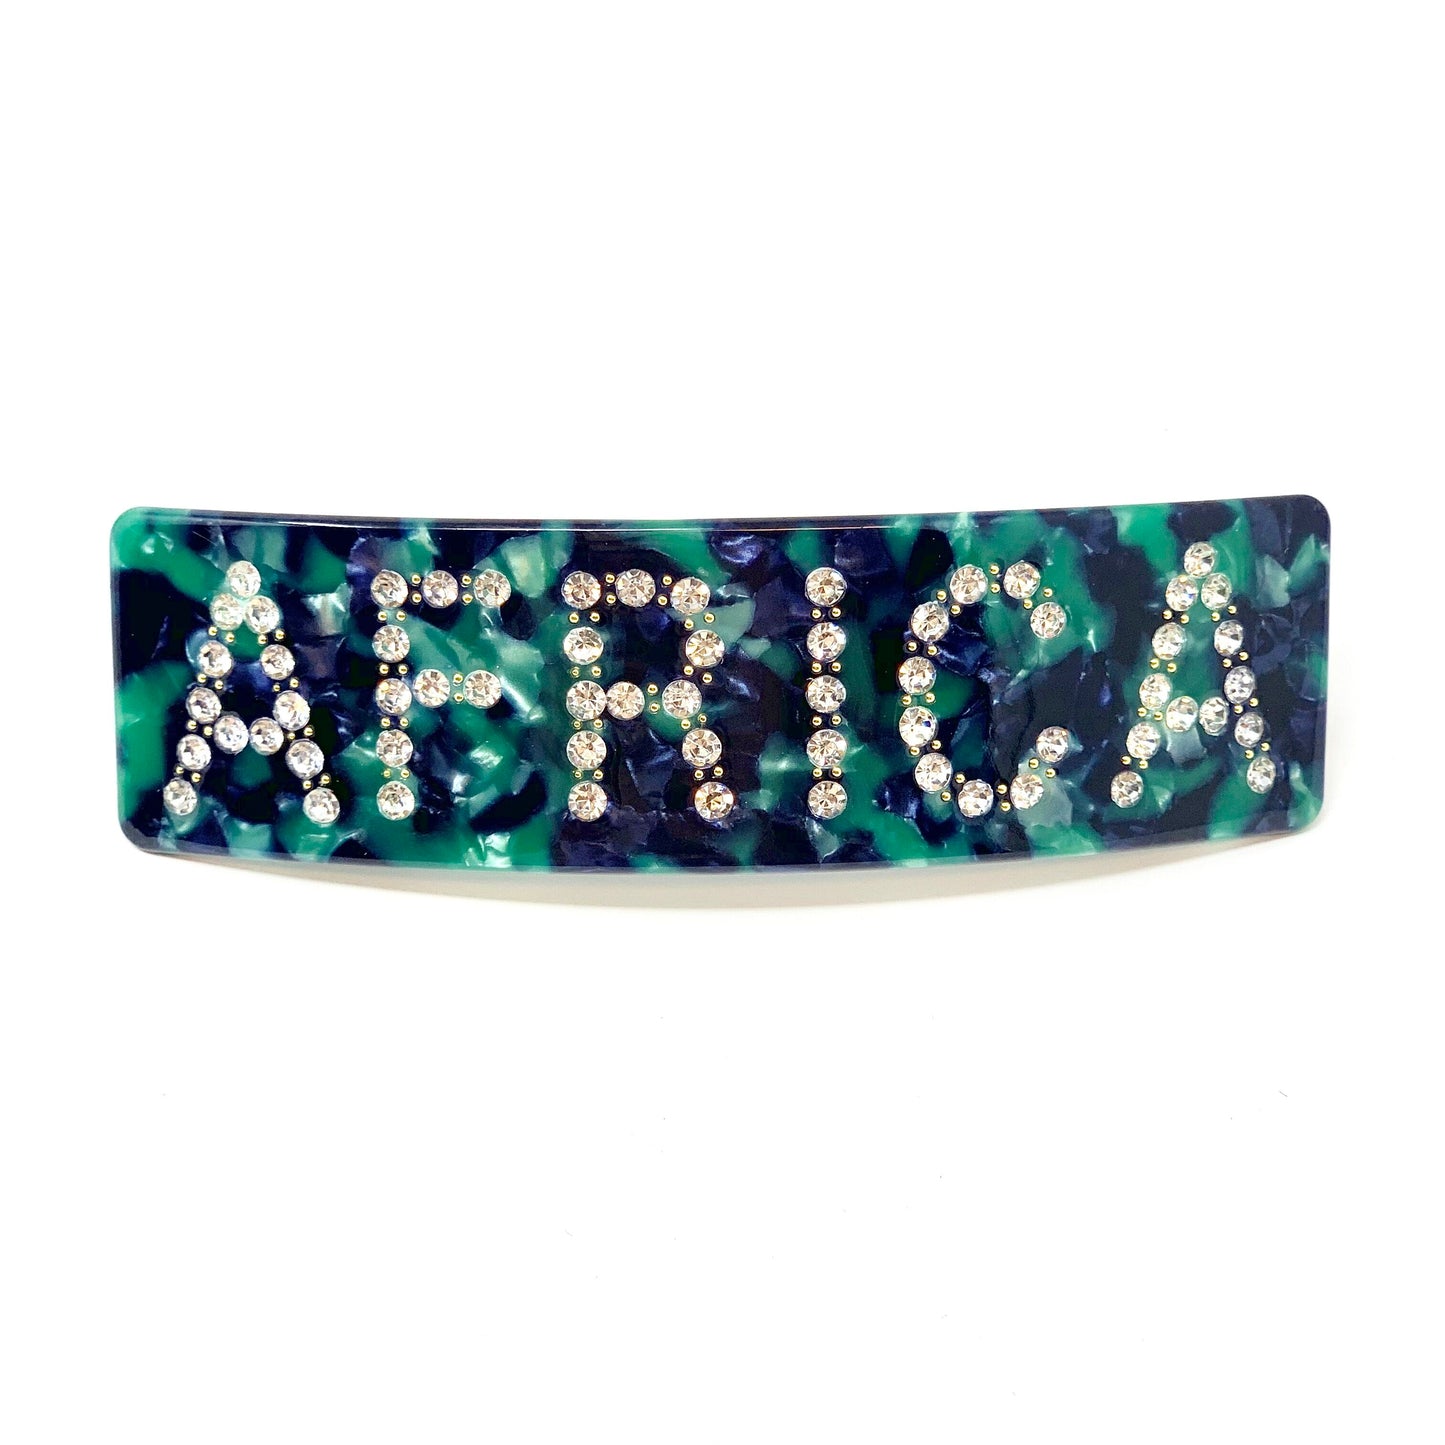 Embellished hairpin with the word AFRICA